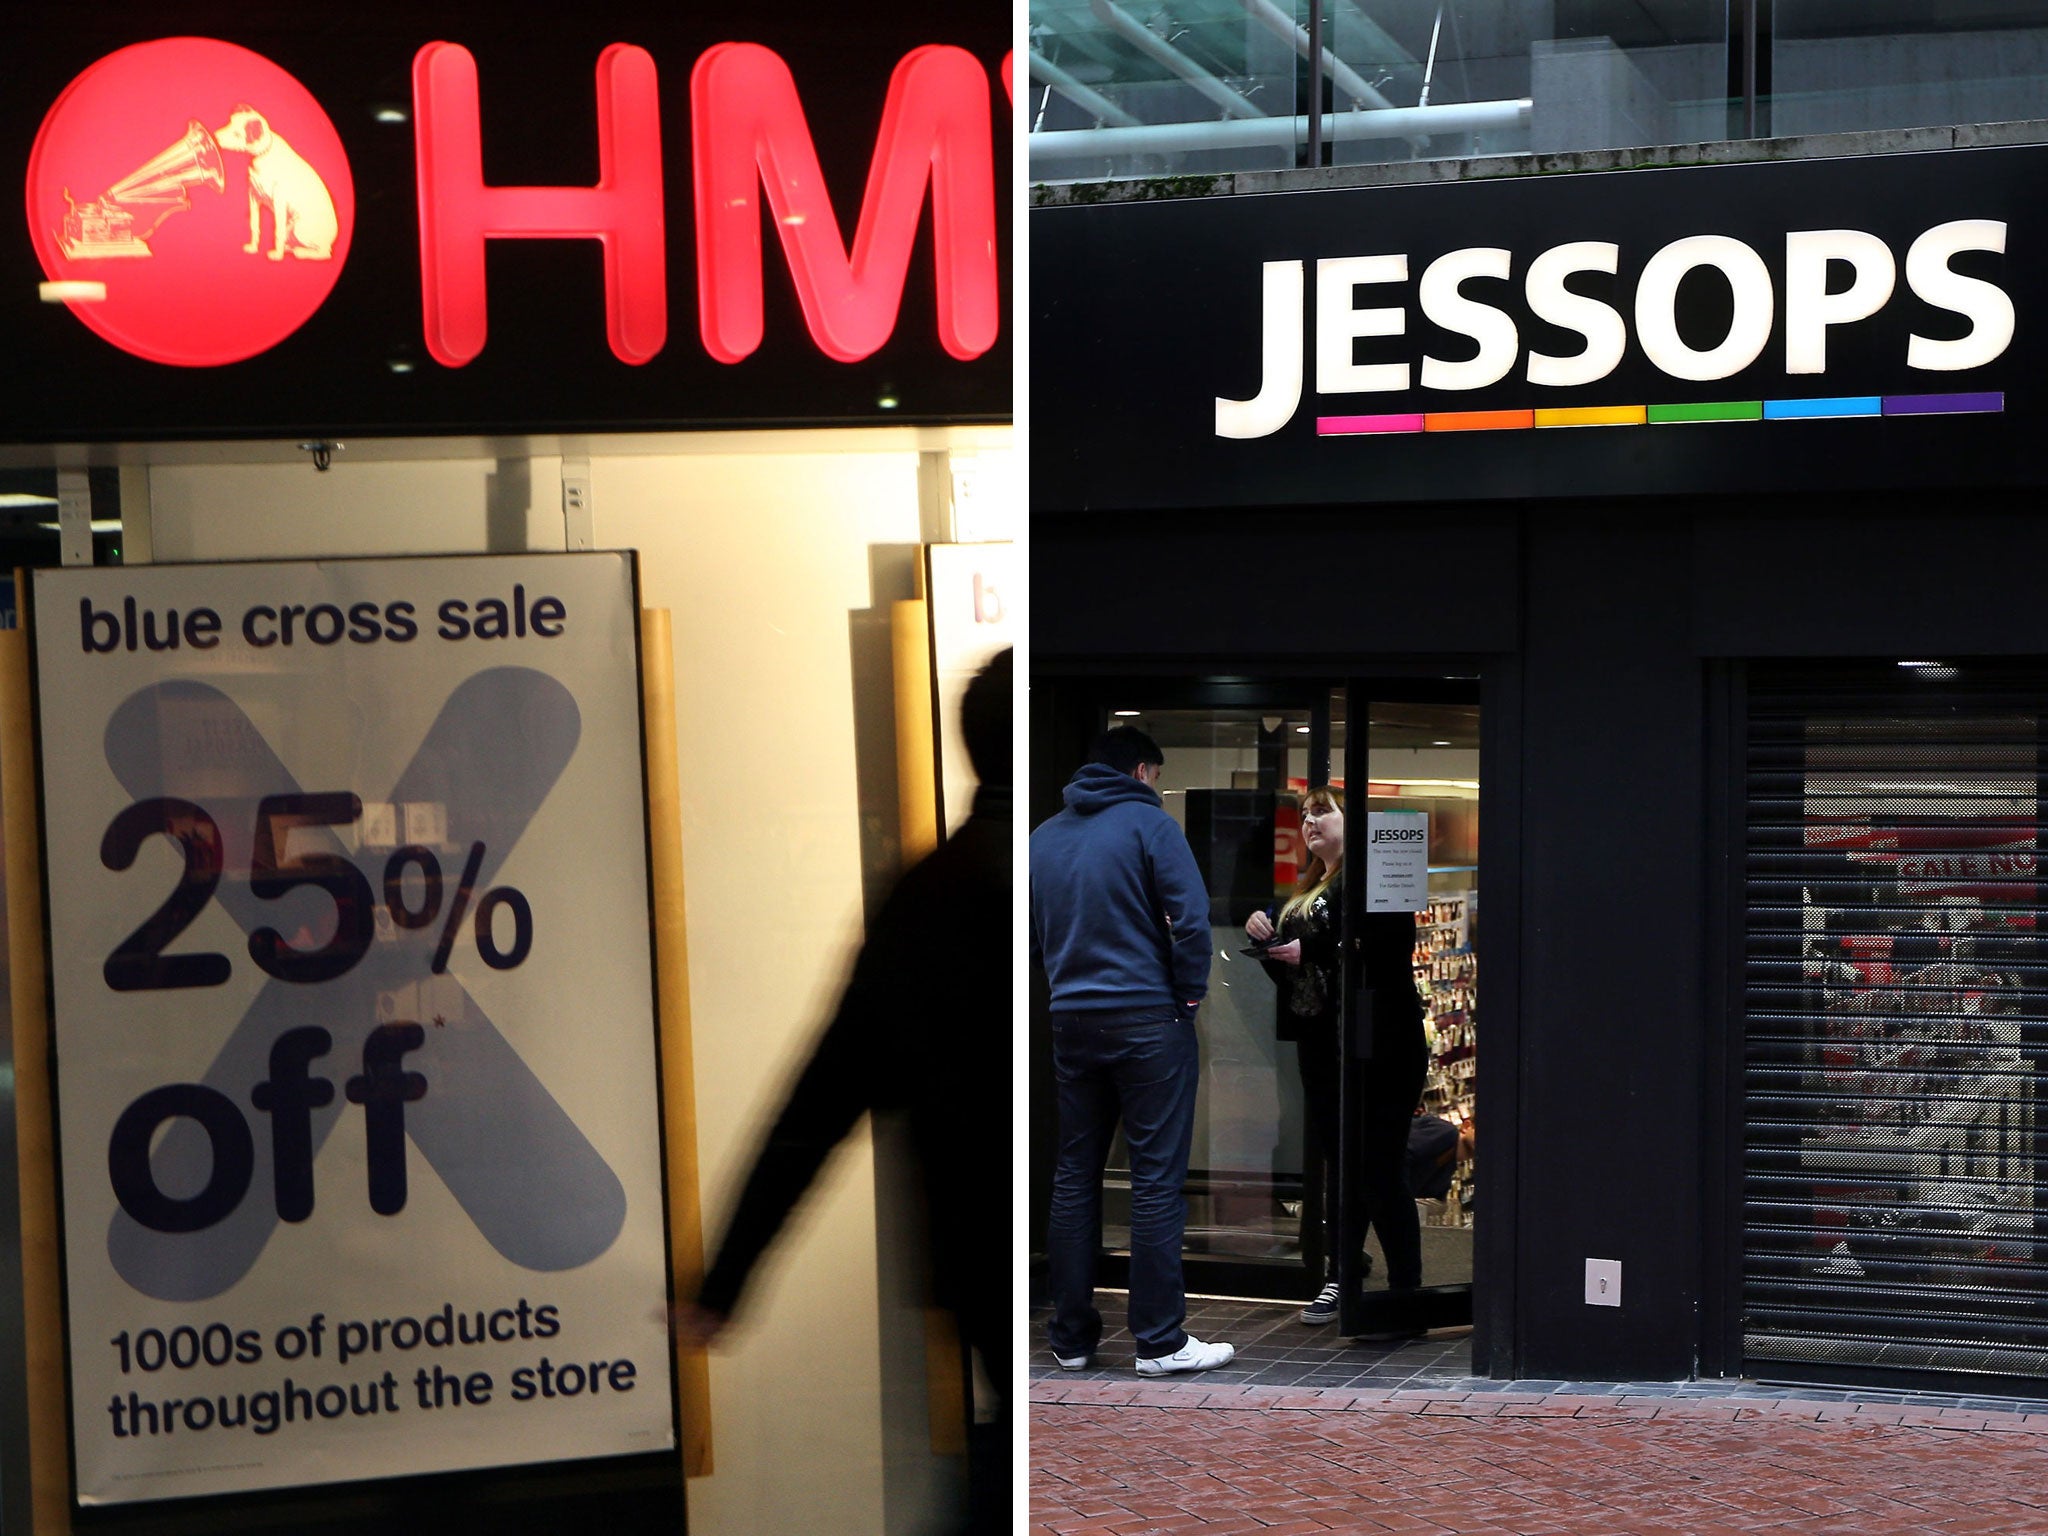 HMV and Jessops are just two of the latest high street retail businesses to go into administration